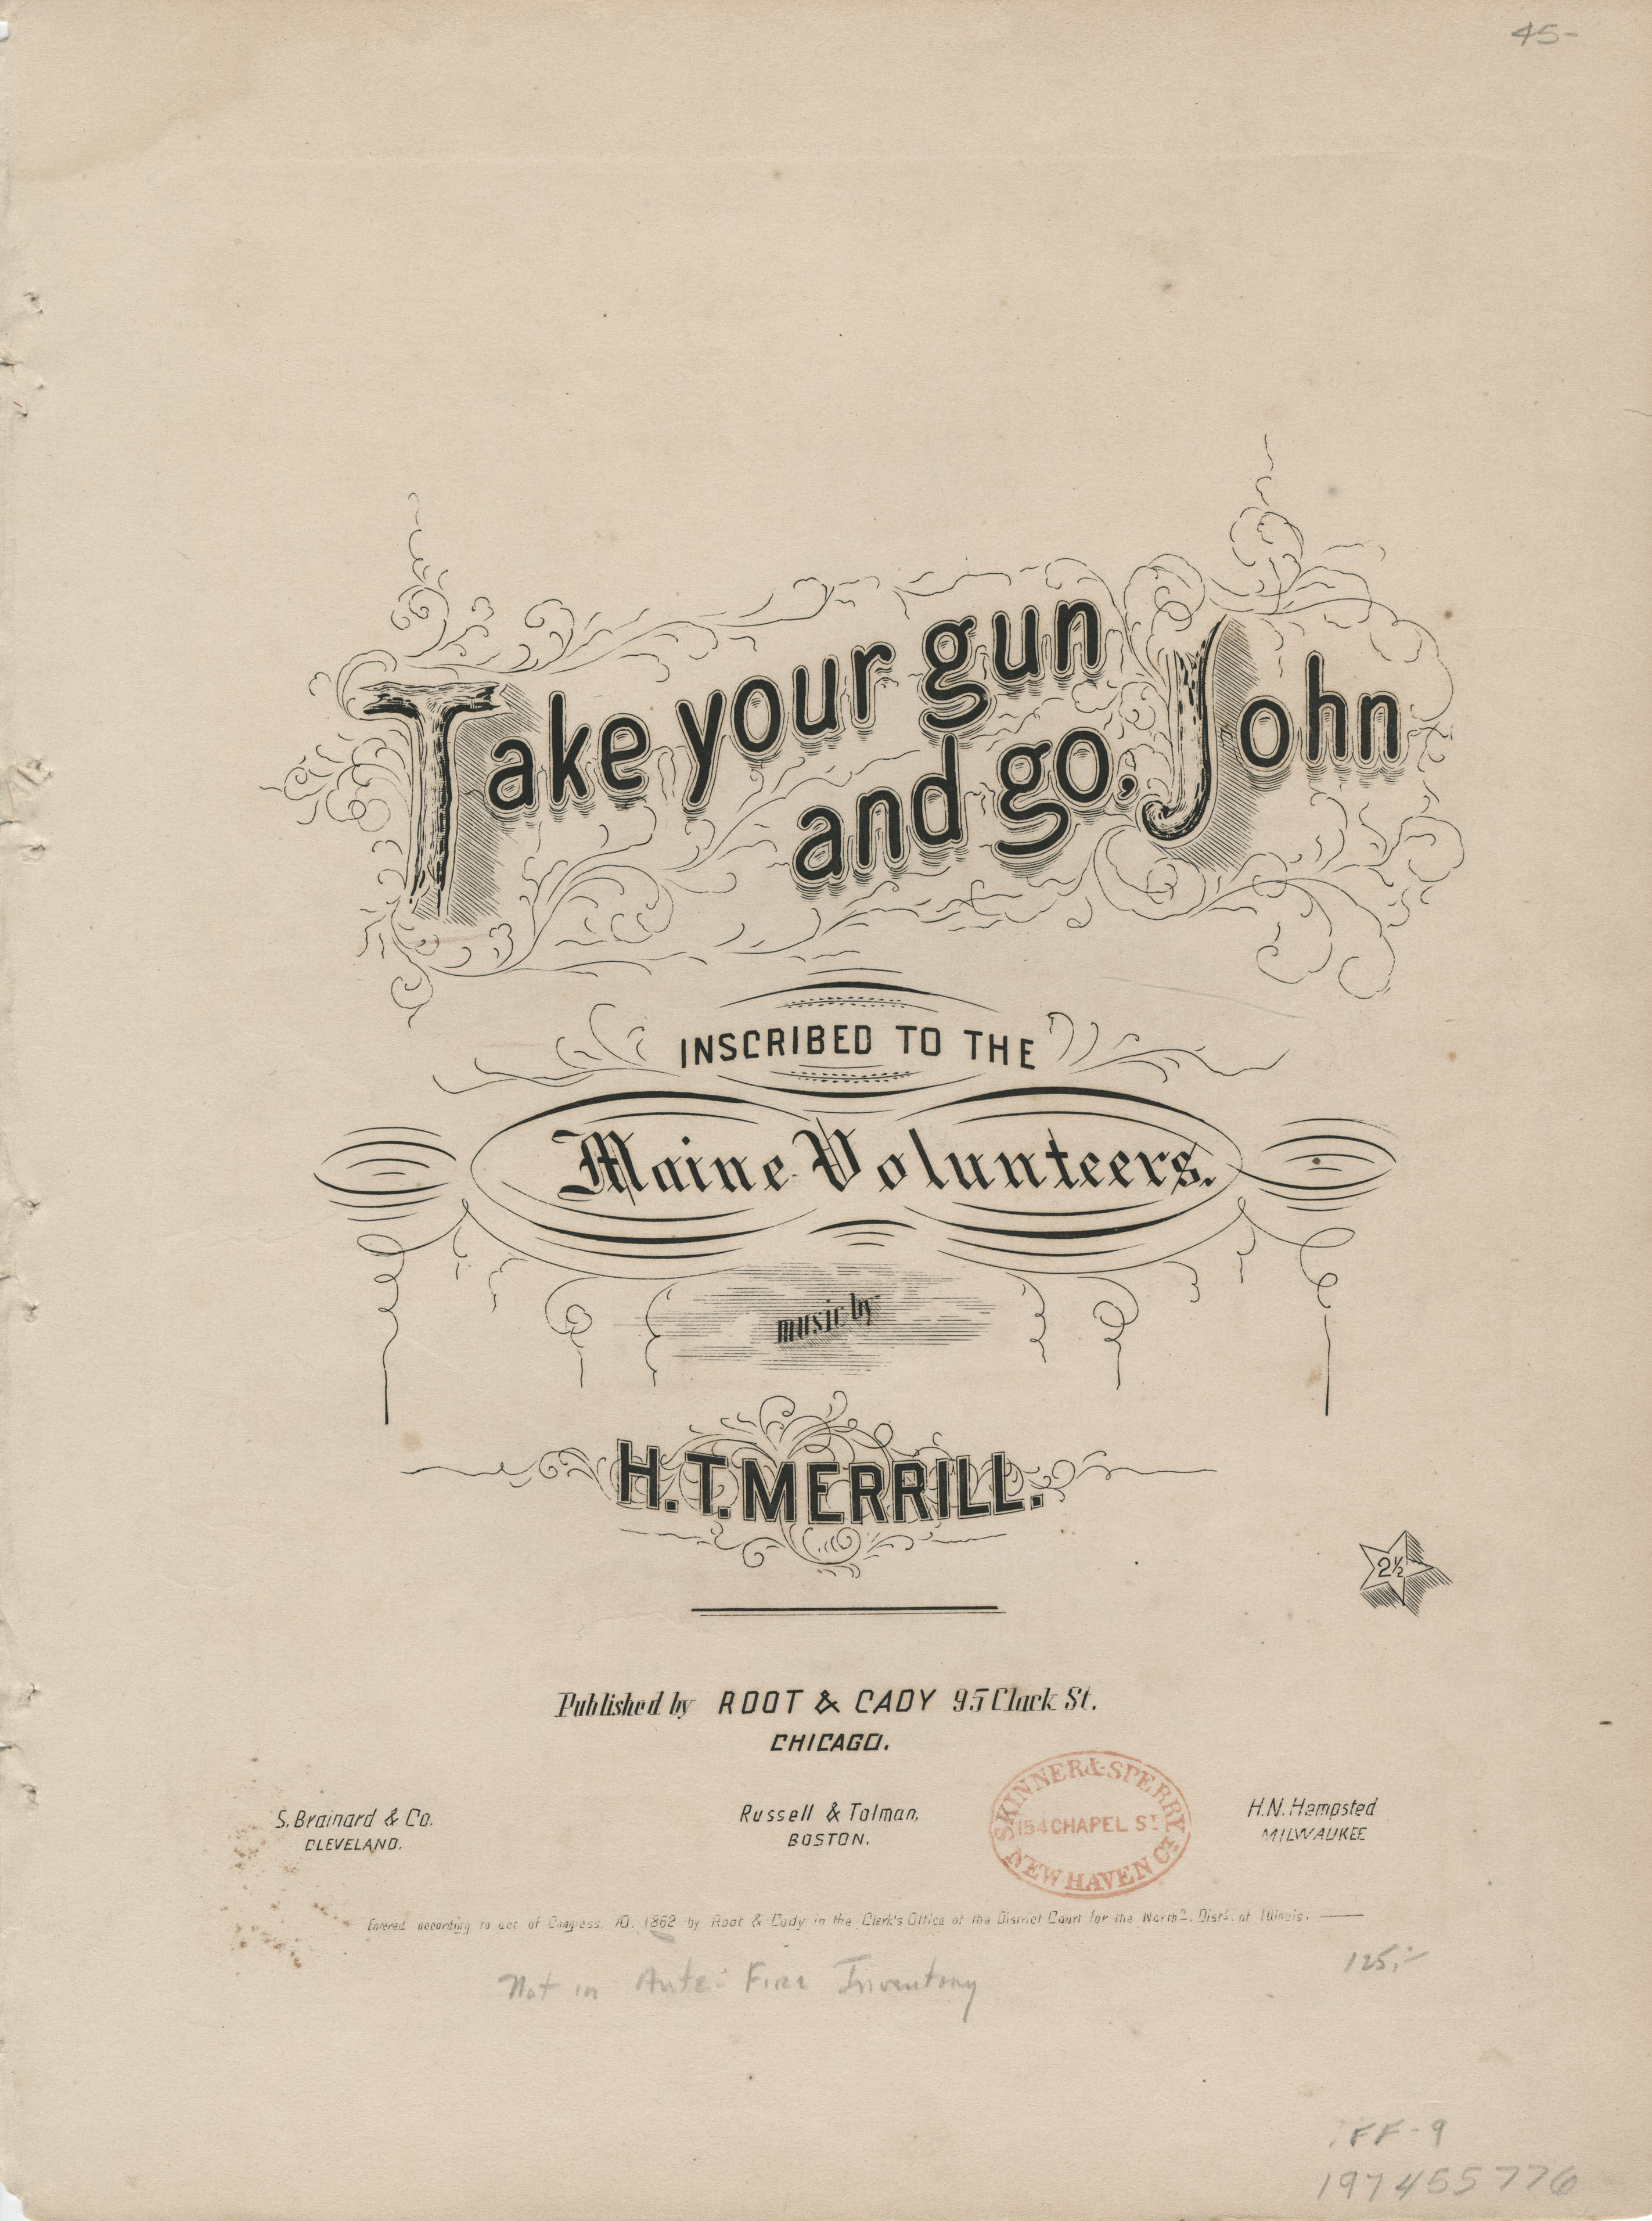 Take your gun and go, John. Inscribed to the Maine Volunteers. (Published by Root & Cady, Chicago, 1863)